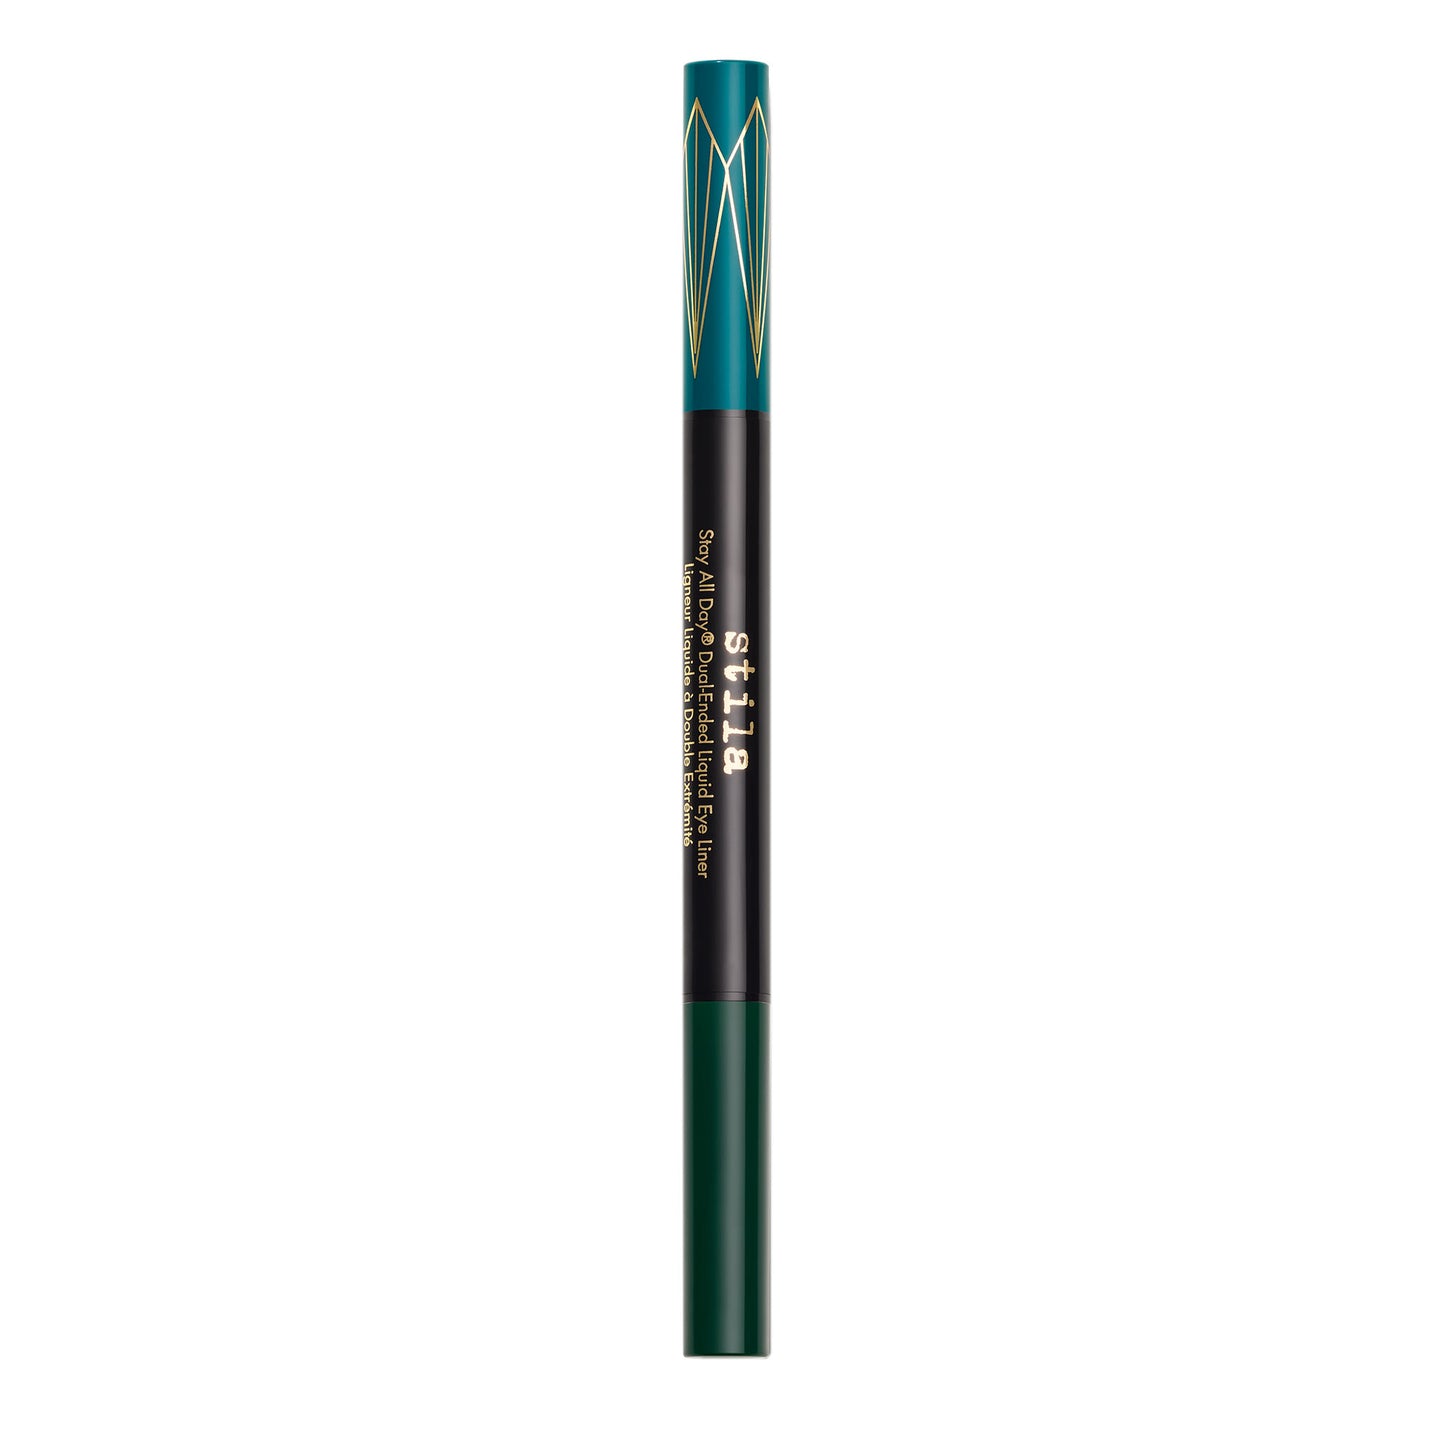 Stila Stay All Day® Dual-Ended Waterproof Liquid Eye Liner: Two Colours - Teal and Intense Jade